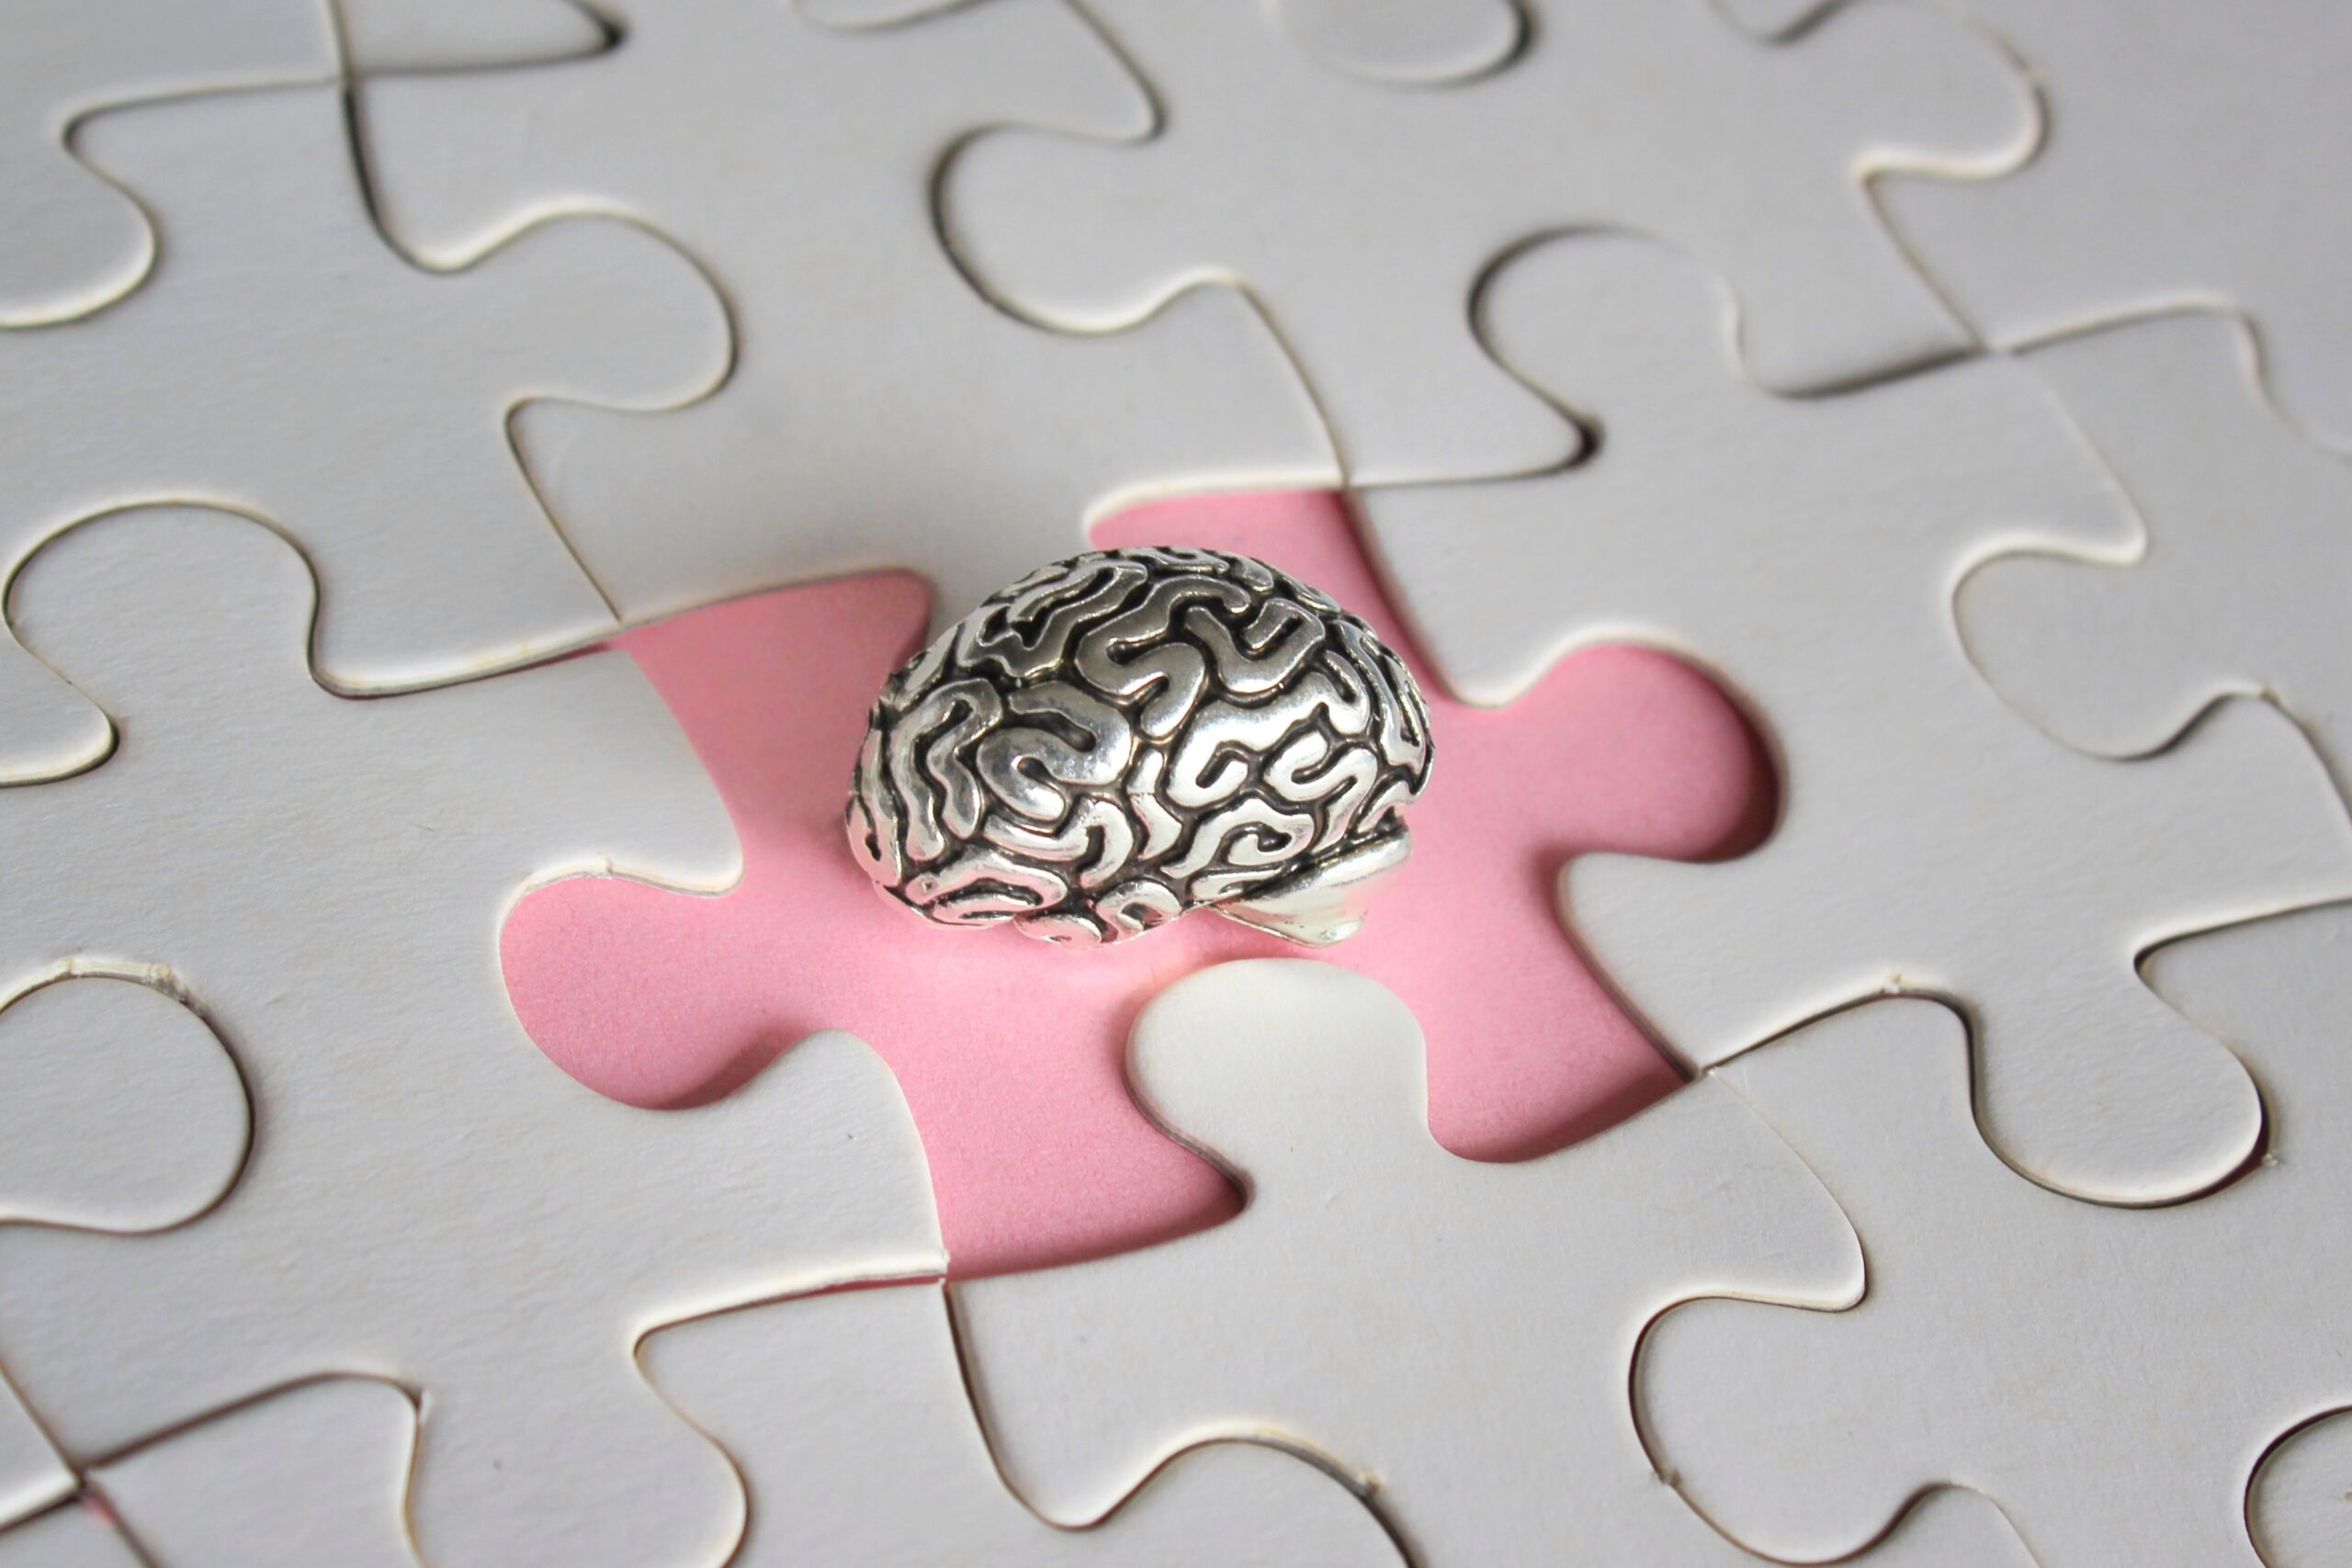 Brain model and missing puzzle pieces.